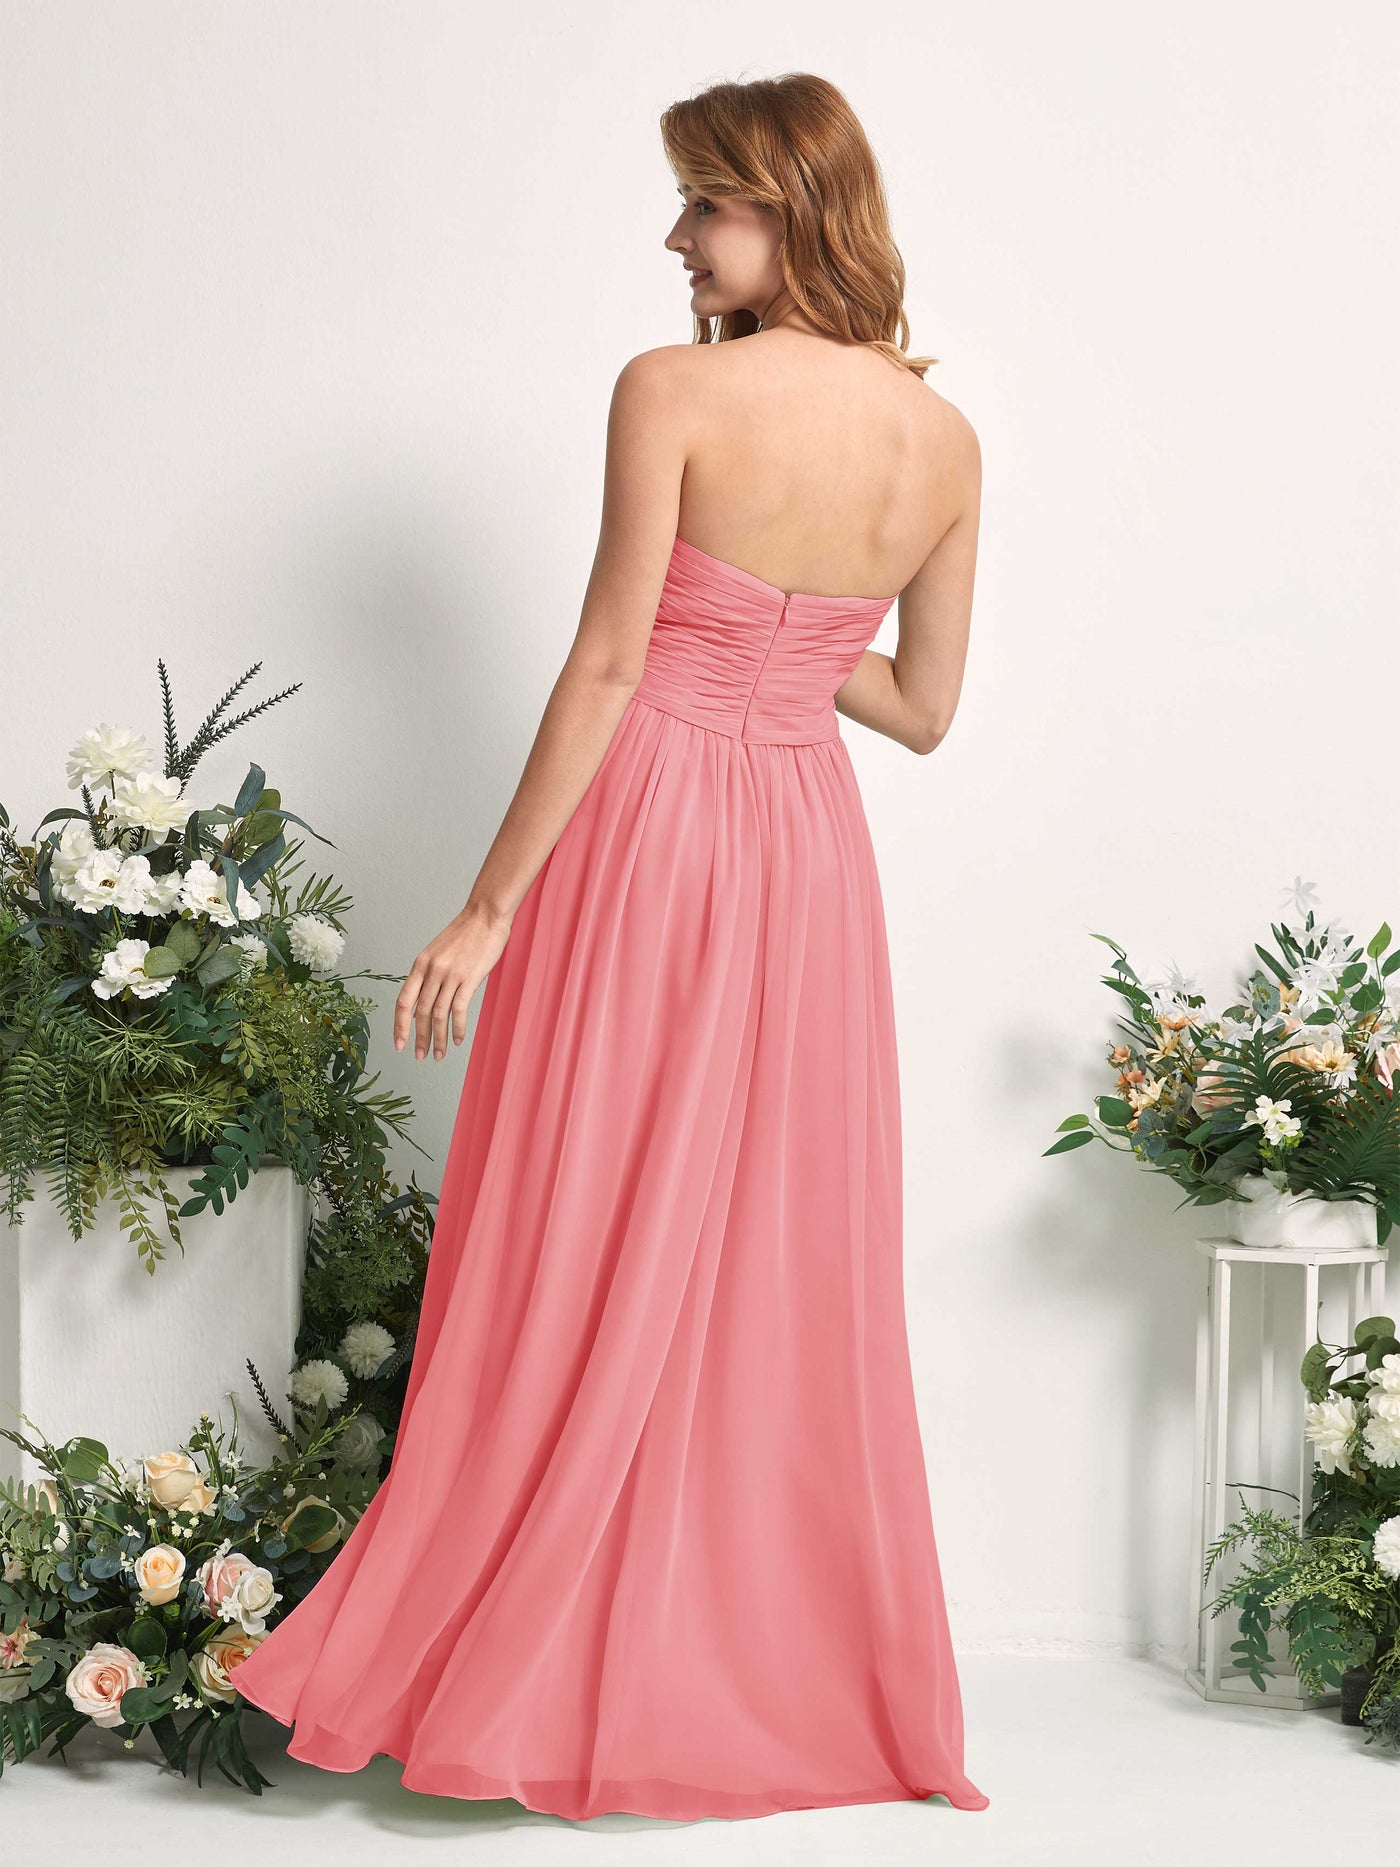 Bridesmaid Dress A-line Chiffon Sweetheart Full Length Sleeveless Wedding Party Dress - Coral Pink (81226930)#color_coral-pink